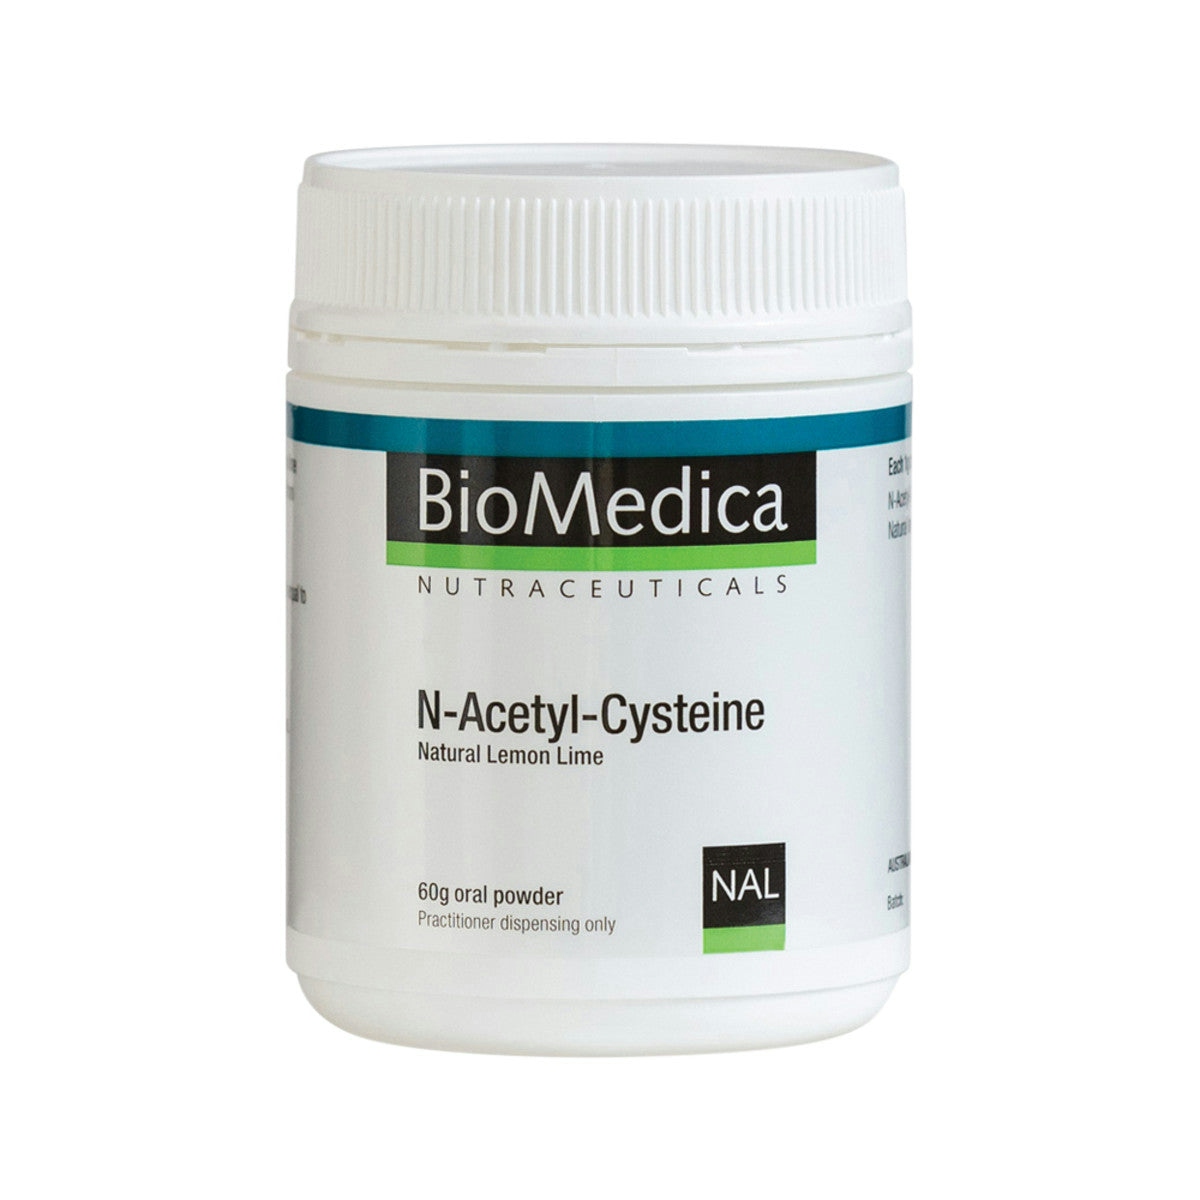 image of Biomedica N Acetyl Cysteine Lemon Lime 60g on white background 